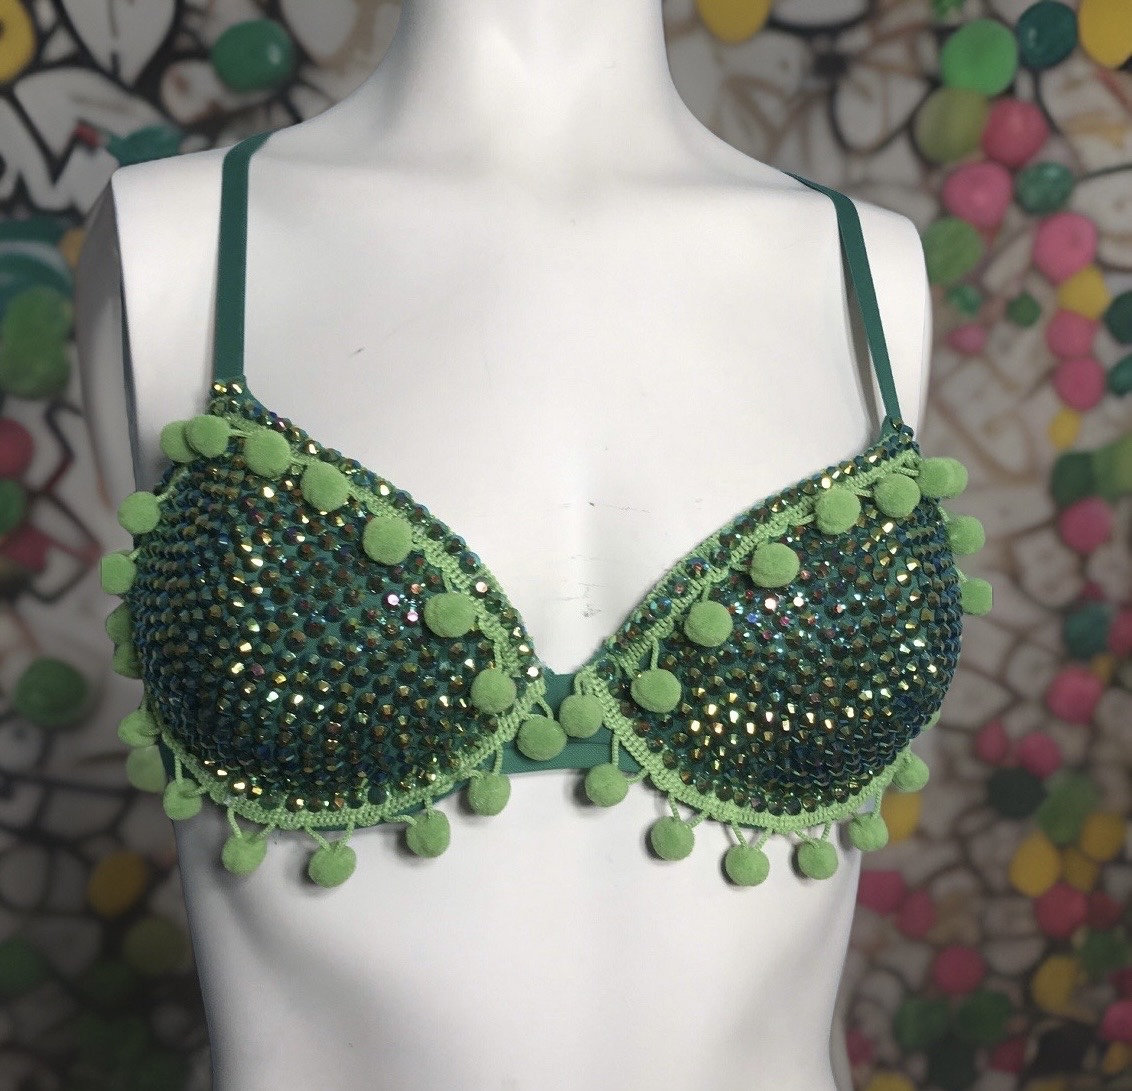 Green AB Rhinestone Embellished Bra With Pom Pom Trim Size 32B and Size S  Green Lace Thong -  Canada